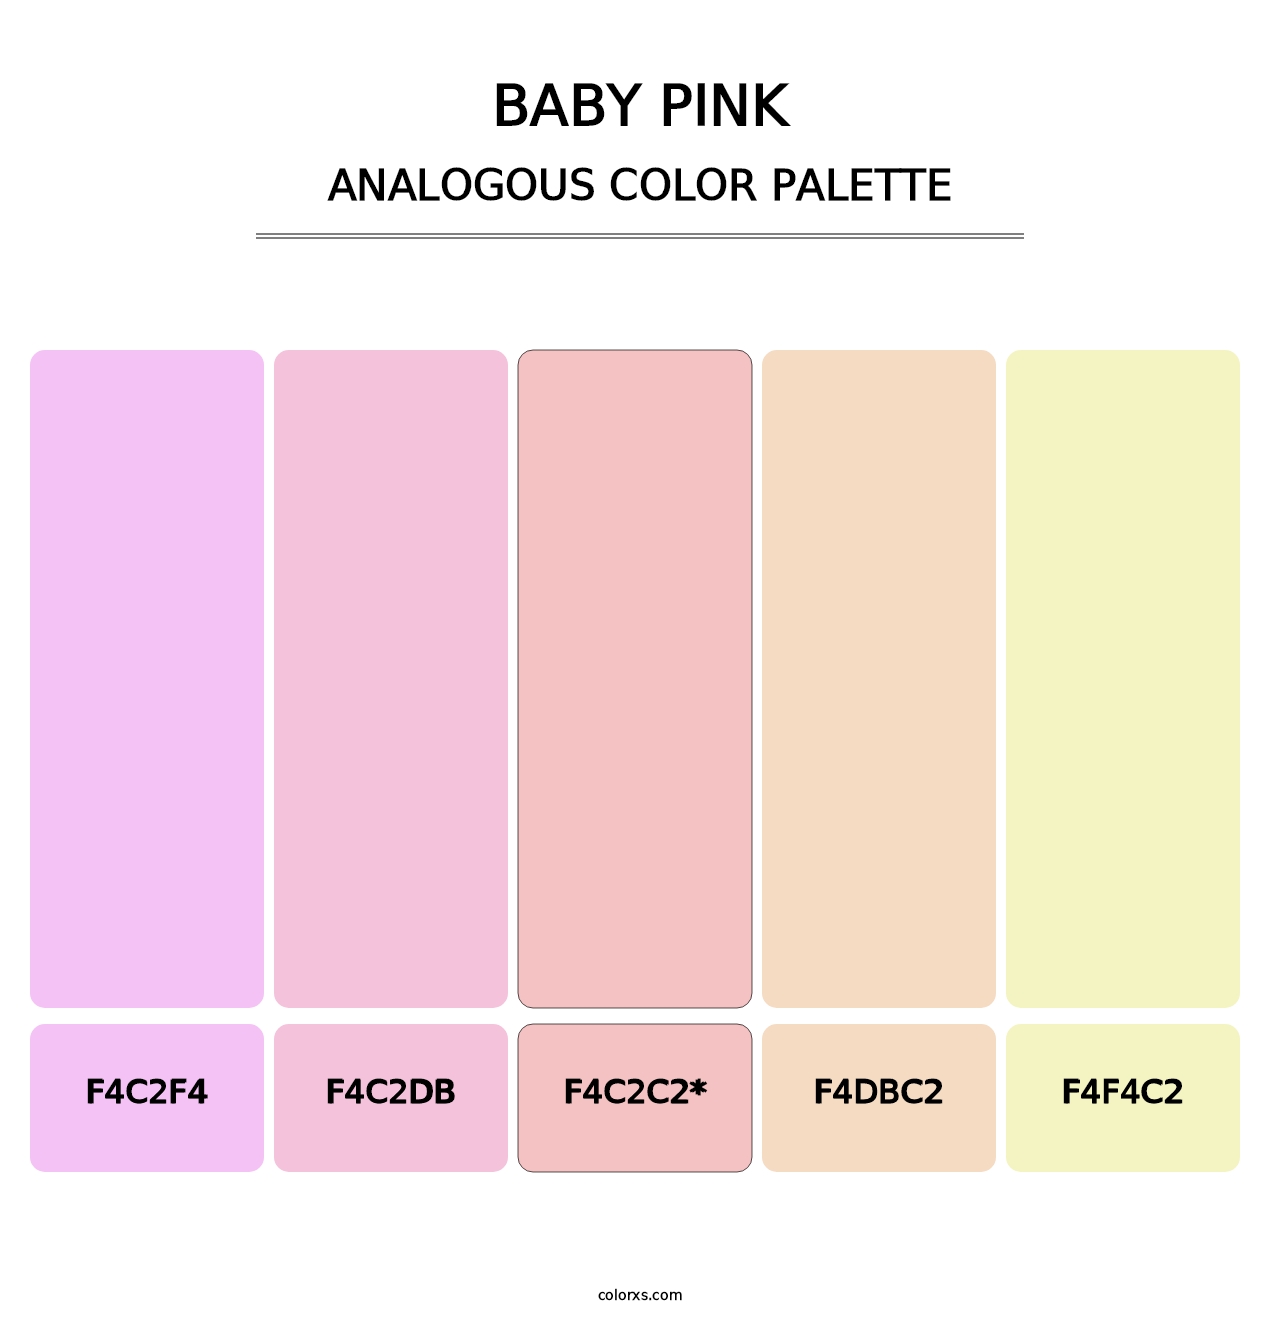 Baby Pink - Analogous Color Palette